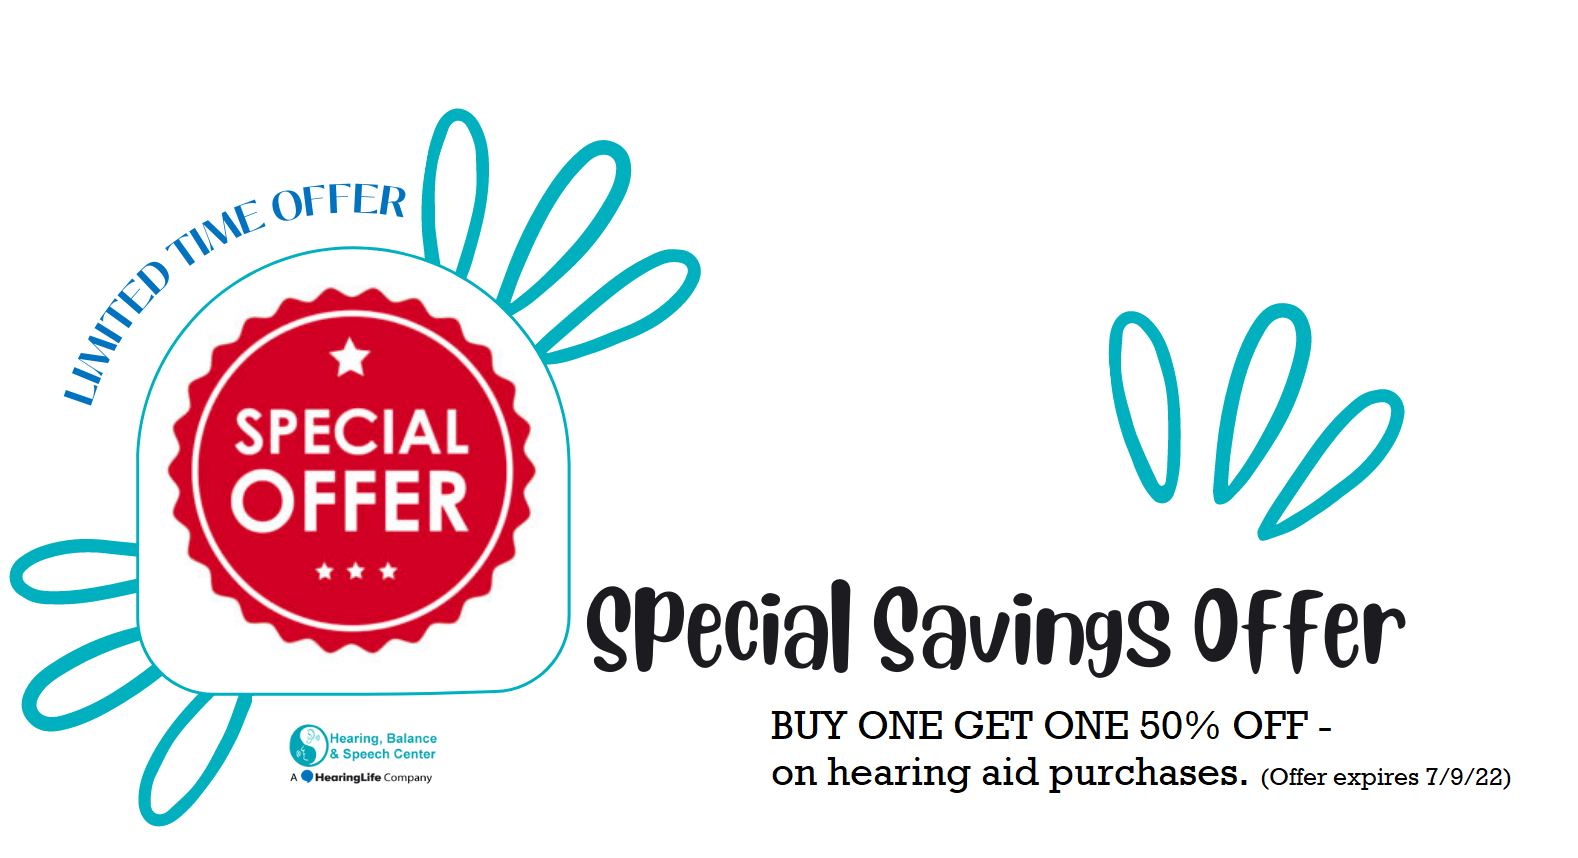 Hearing Aids Discount Offer